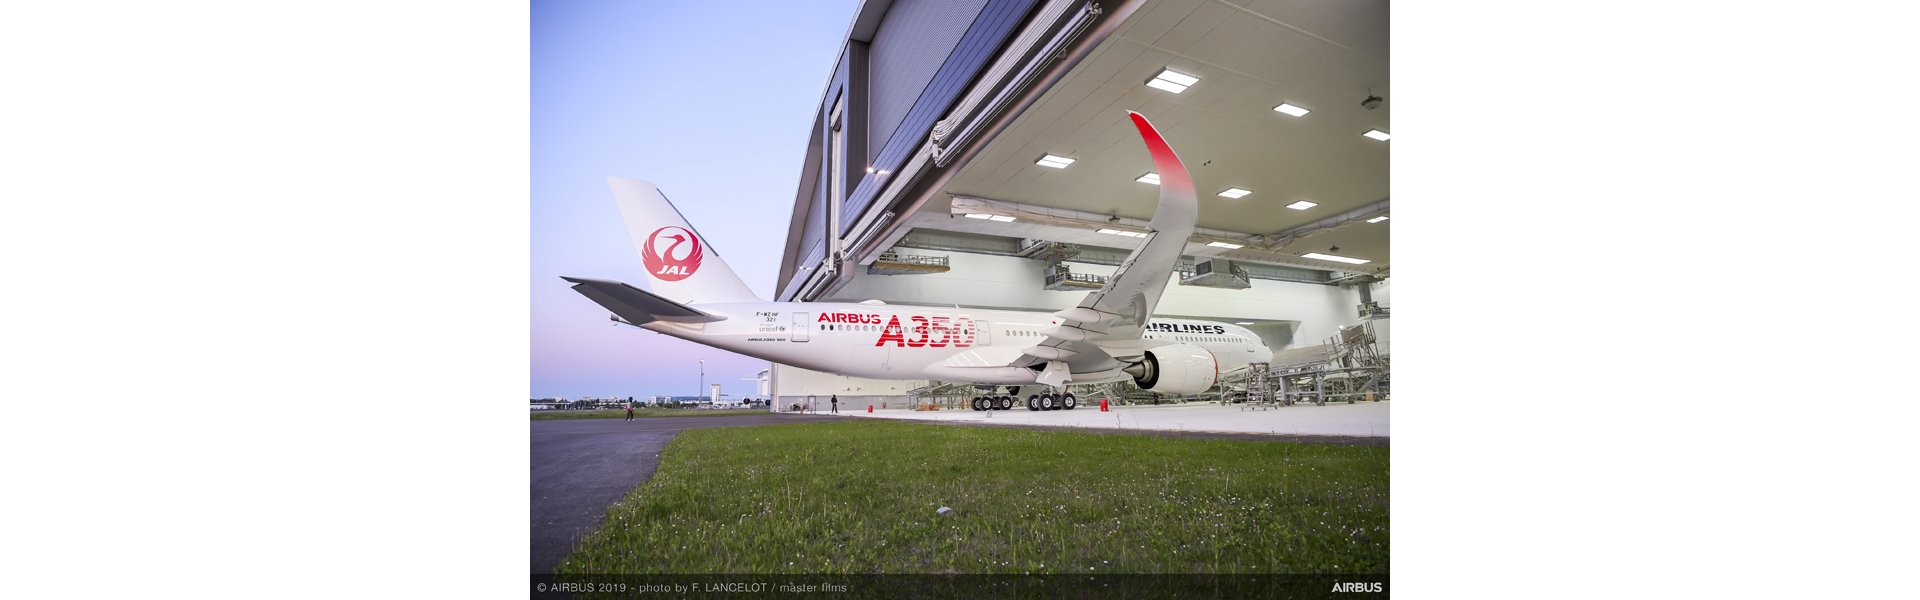 First Jal A350 900 Rolls Out Of Airbus Paint Shop Commercial